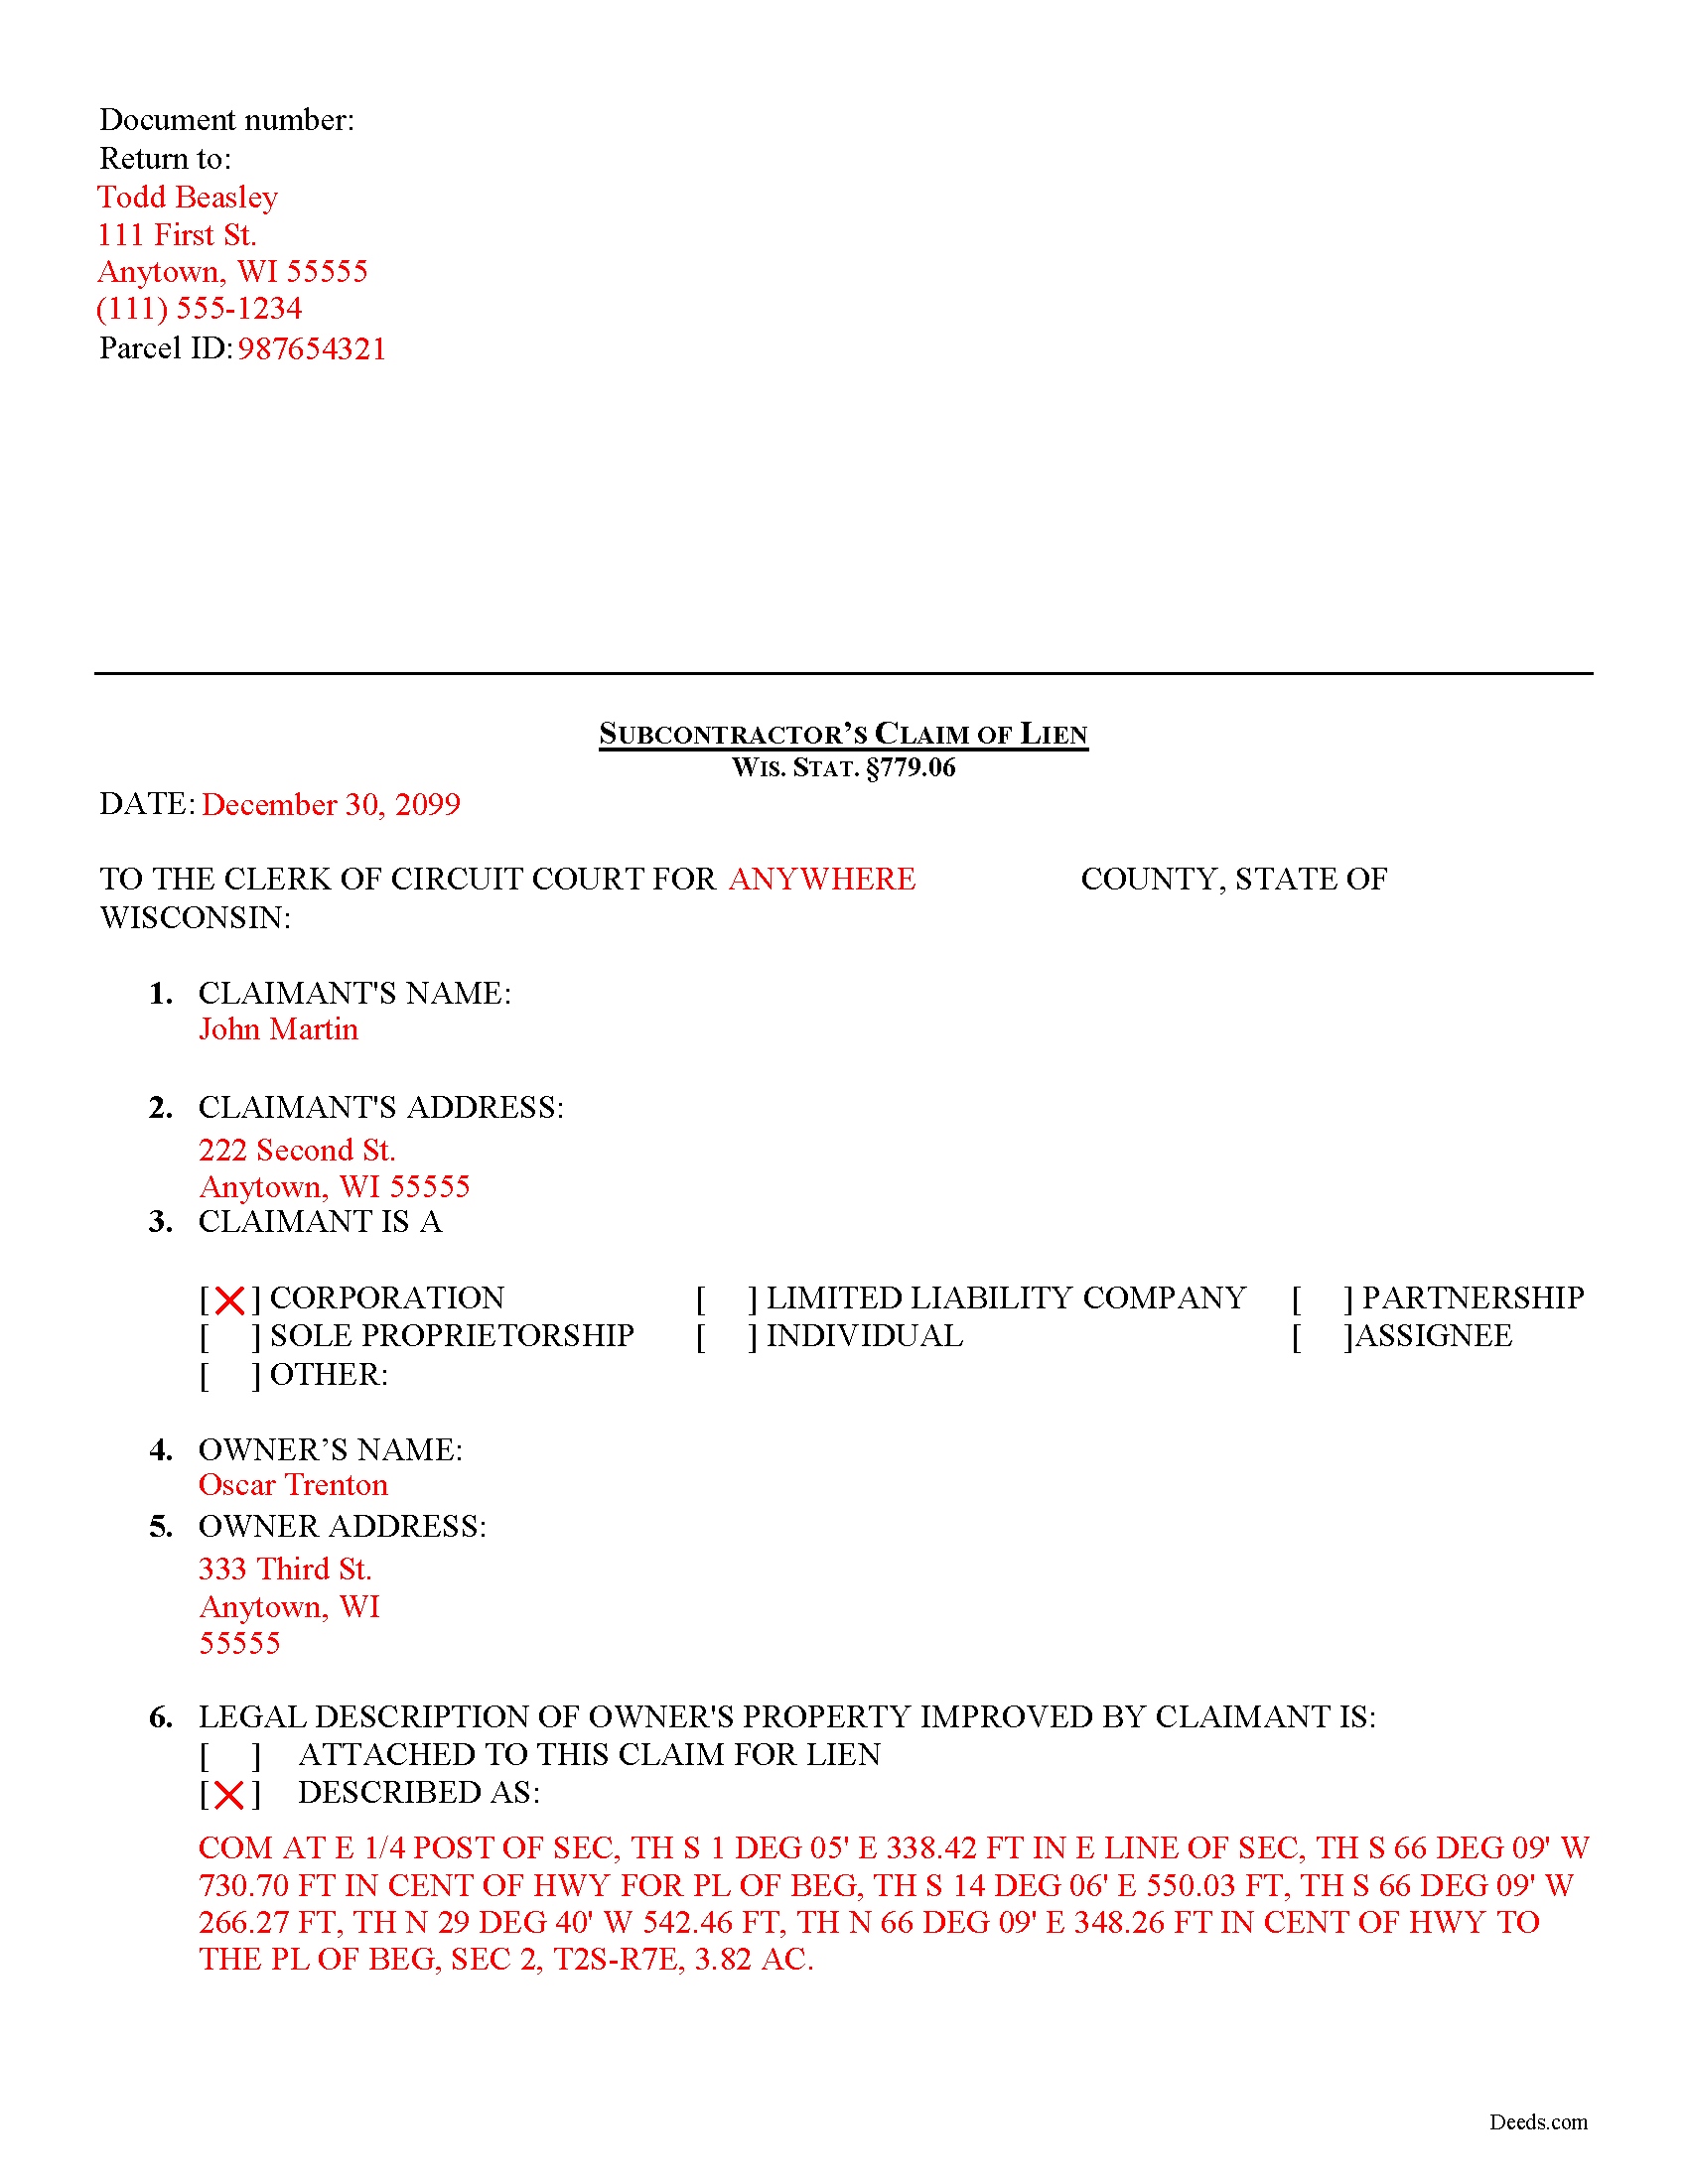 Completed Example of the Subcontractor Claim of Lien Document